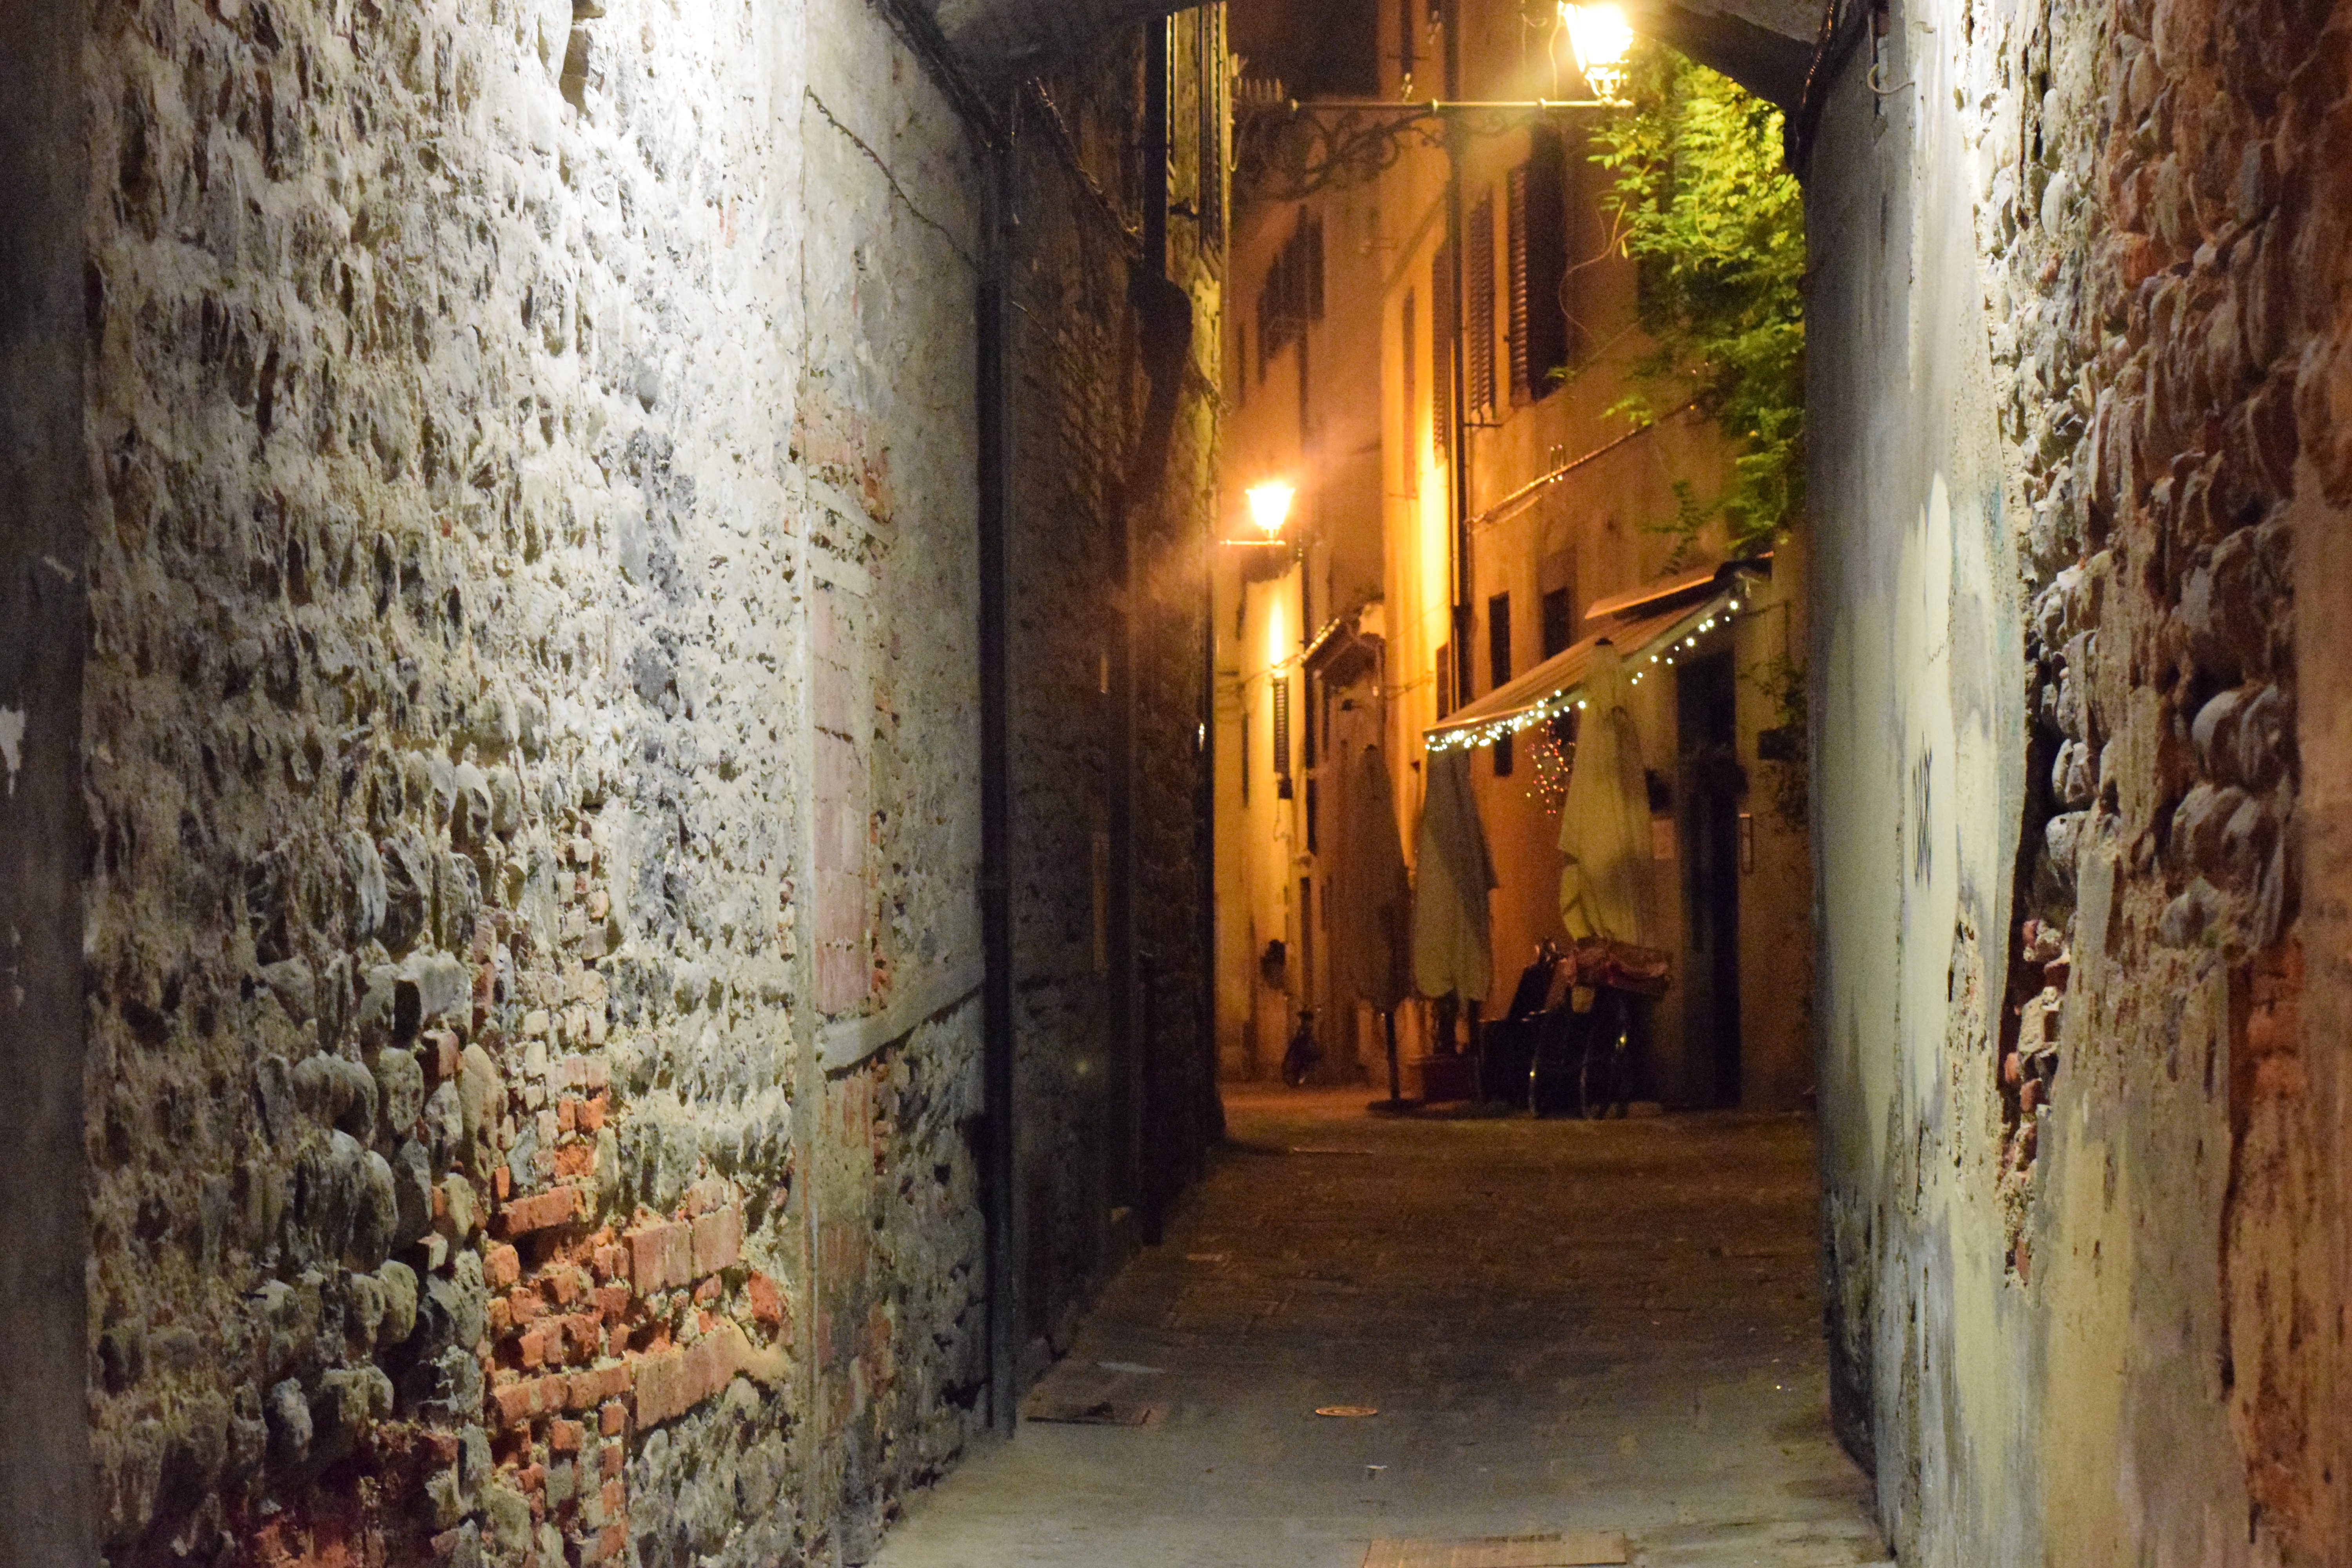 Emily Dickinson and Pistoia’s Nocturnal Streets